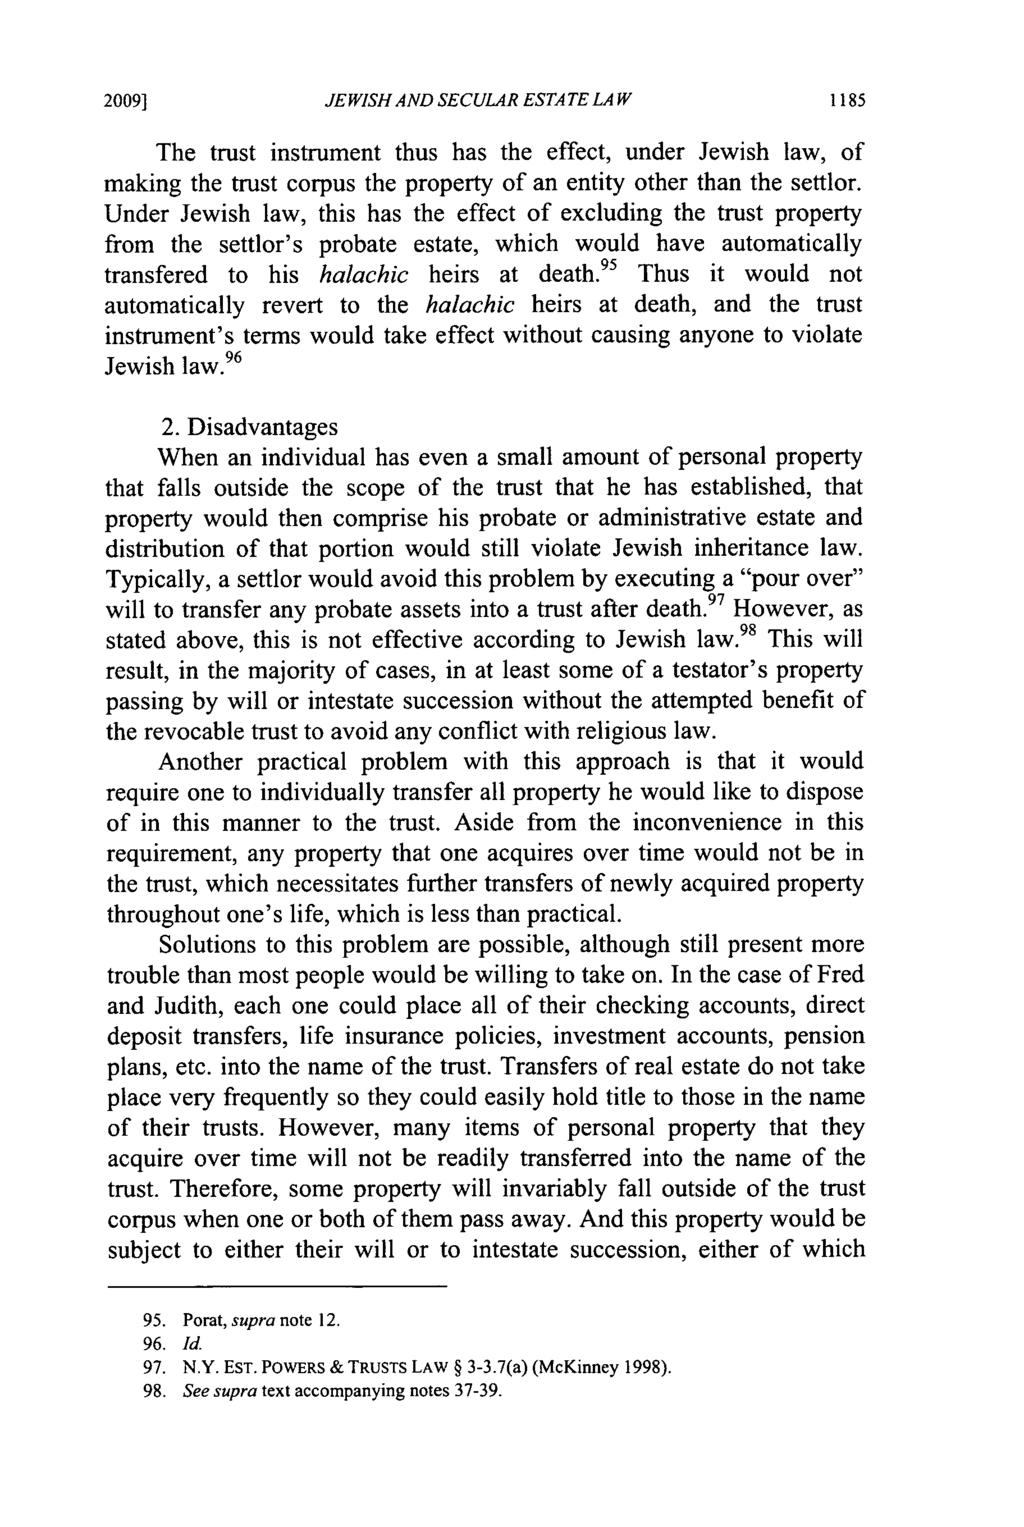 Wolf: Resolving the Conflict Between Jewish and Secular Estate Law 2009] JEWISH AND SECULAR ESTATE LAW The trust instrument thus has the effect, under Jewish law, of making the trust corpus the